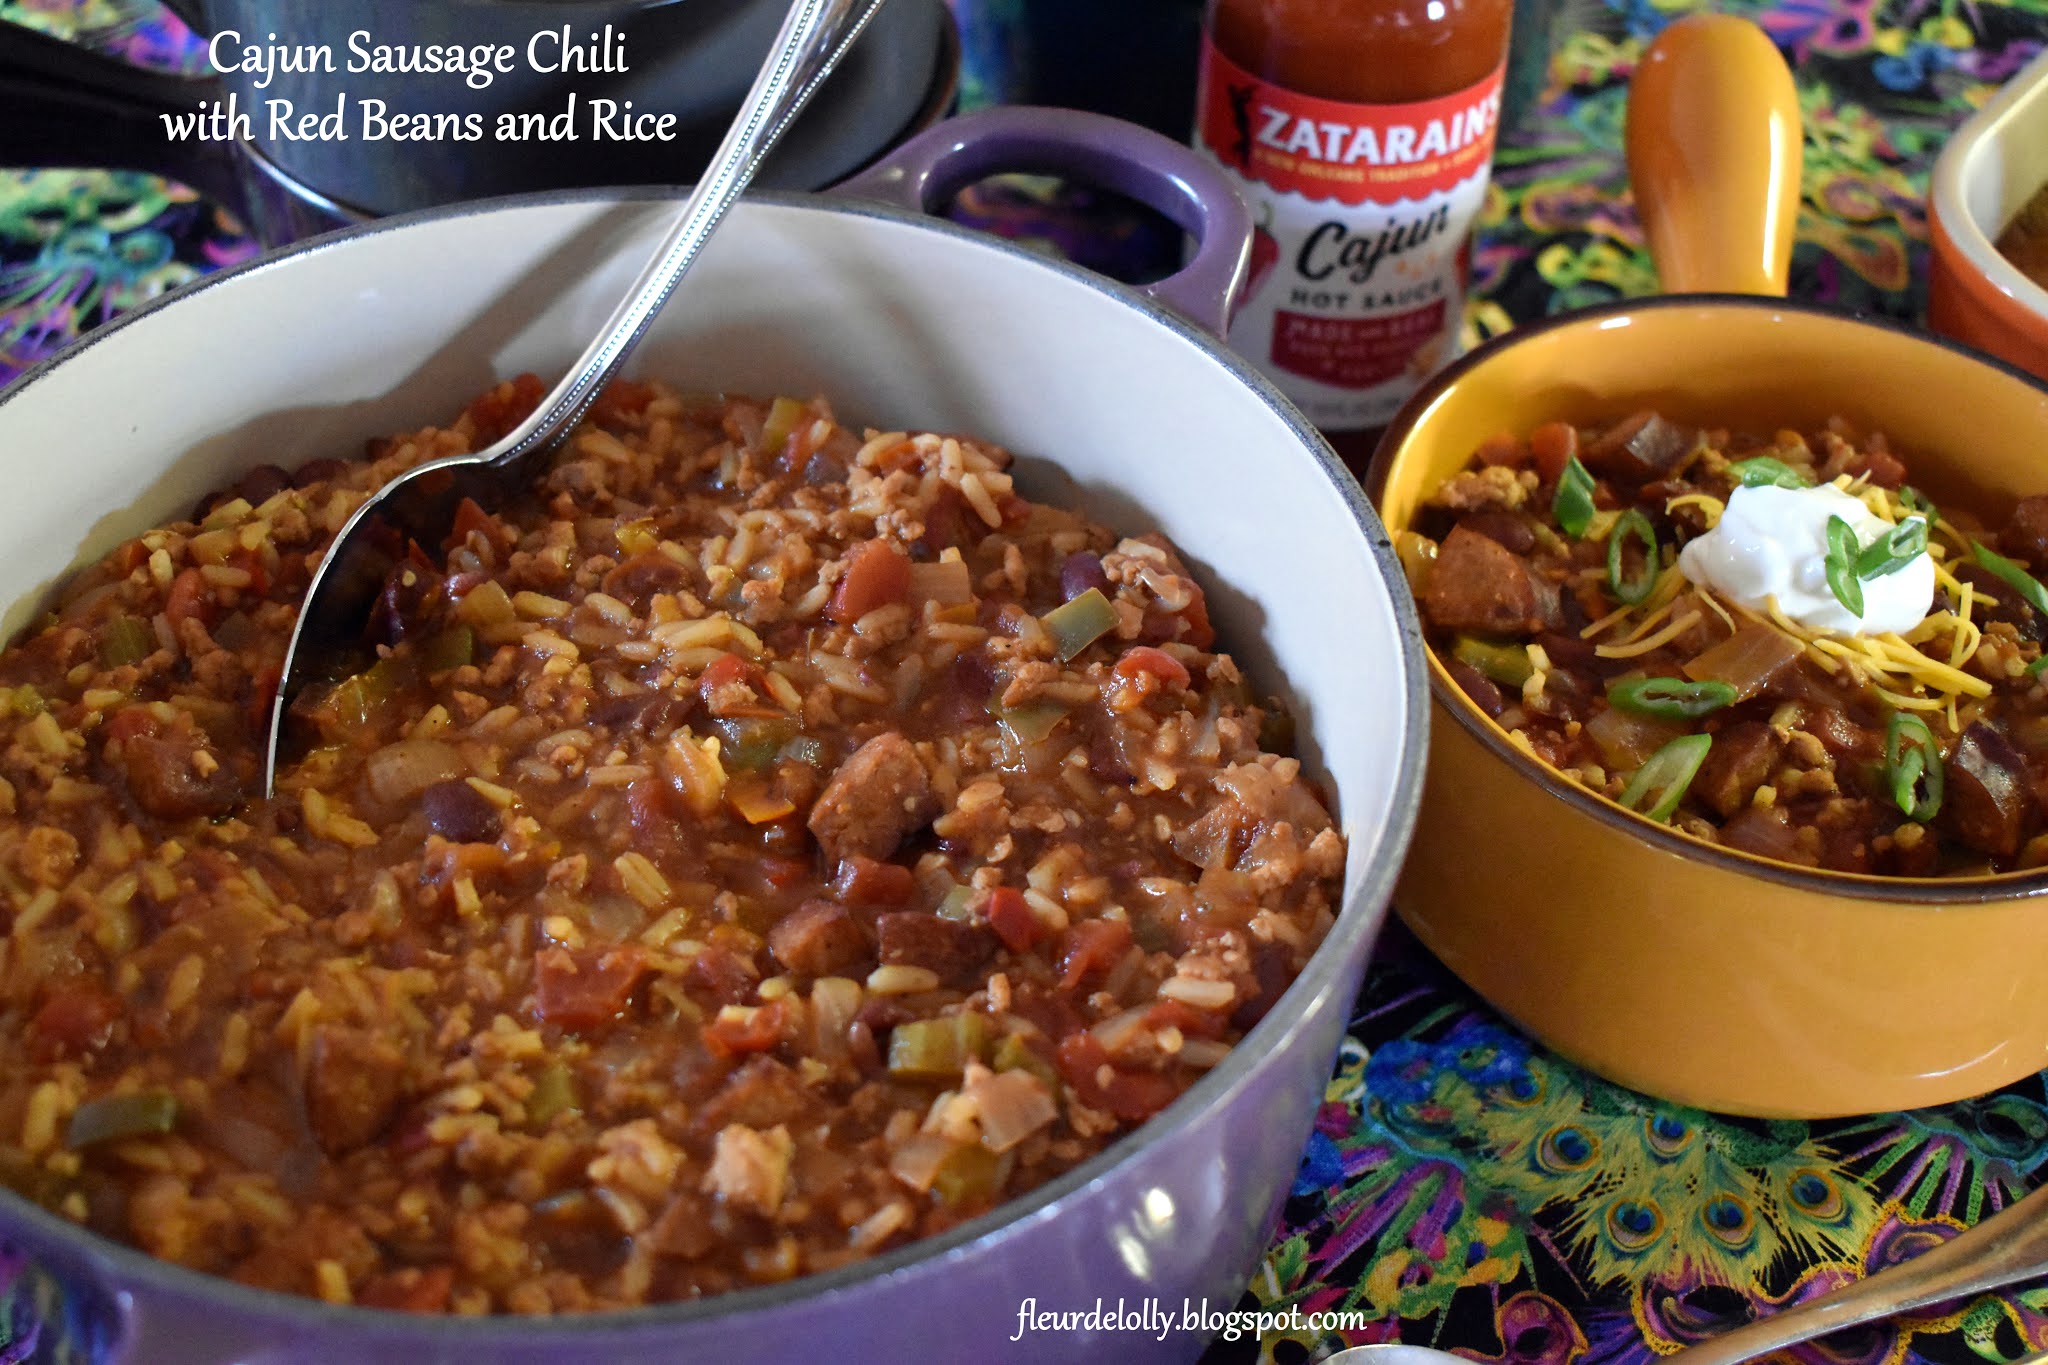 Fleur de Lolly: Zatarain's Cajun Sausage Chili with Red Beans and Rice